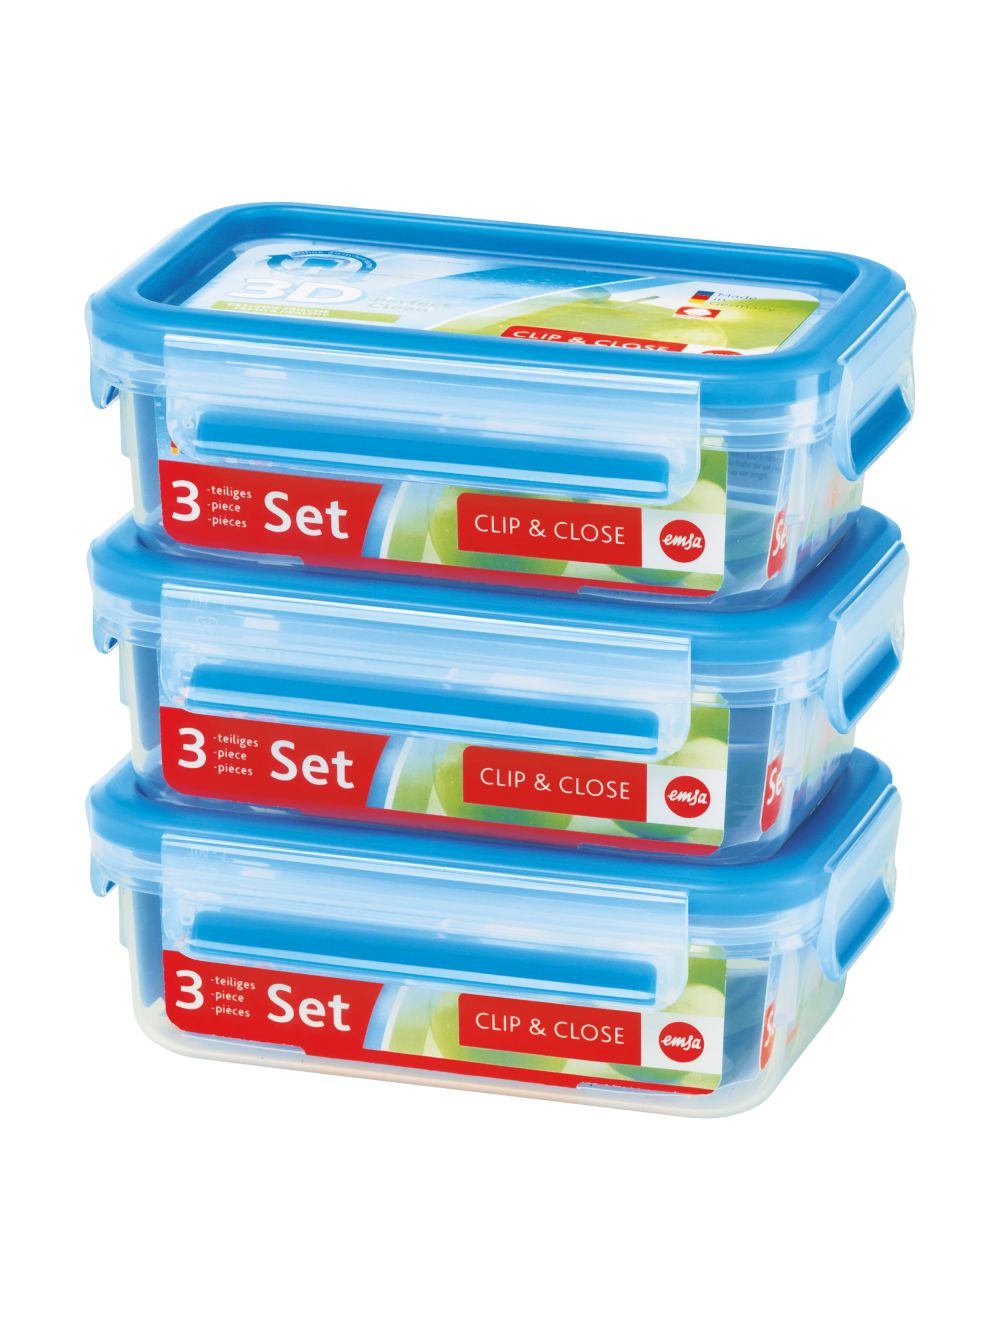 Clip & Close Stacking Boxes 3Pc 0.55L